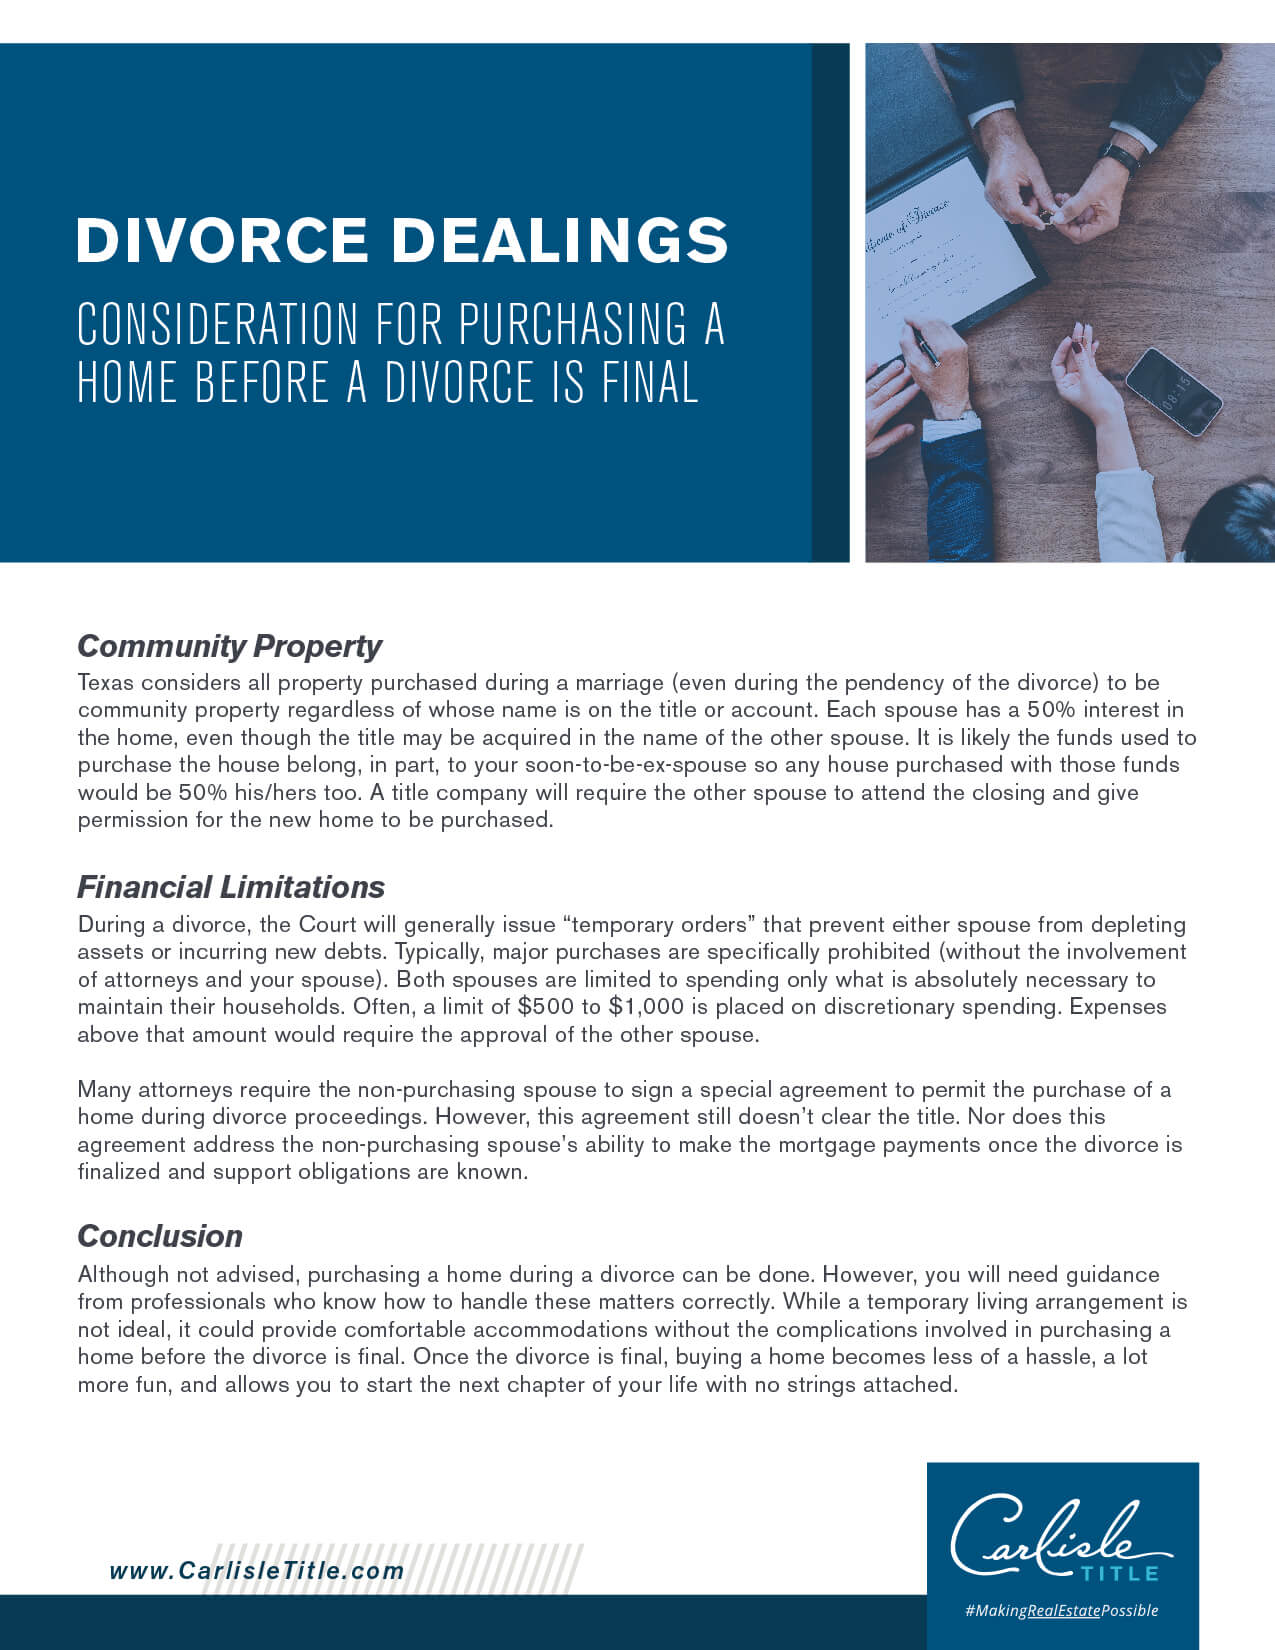 Divorce and Home Purchase